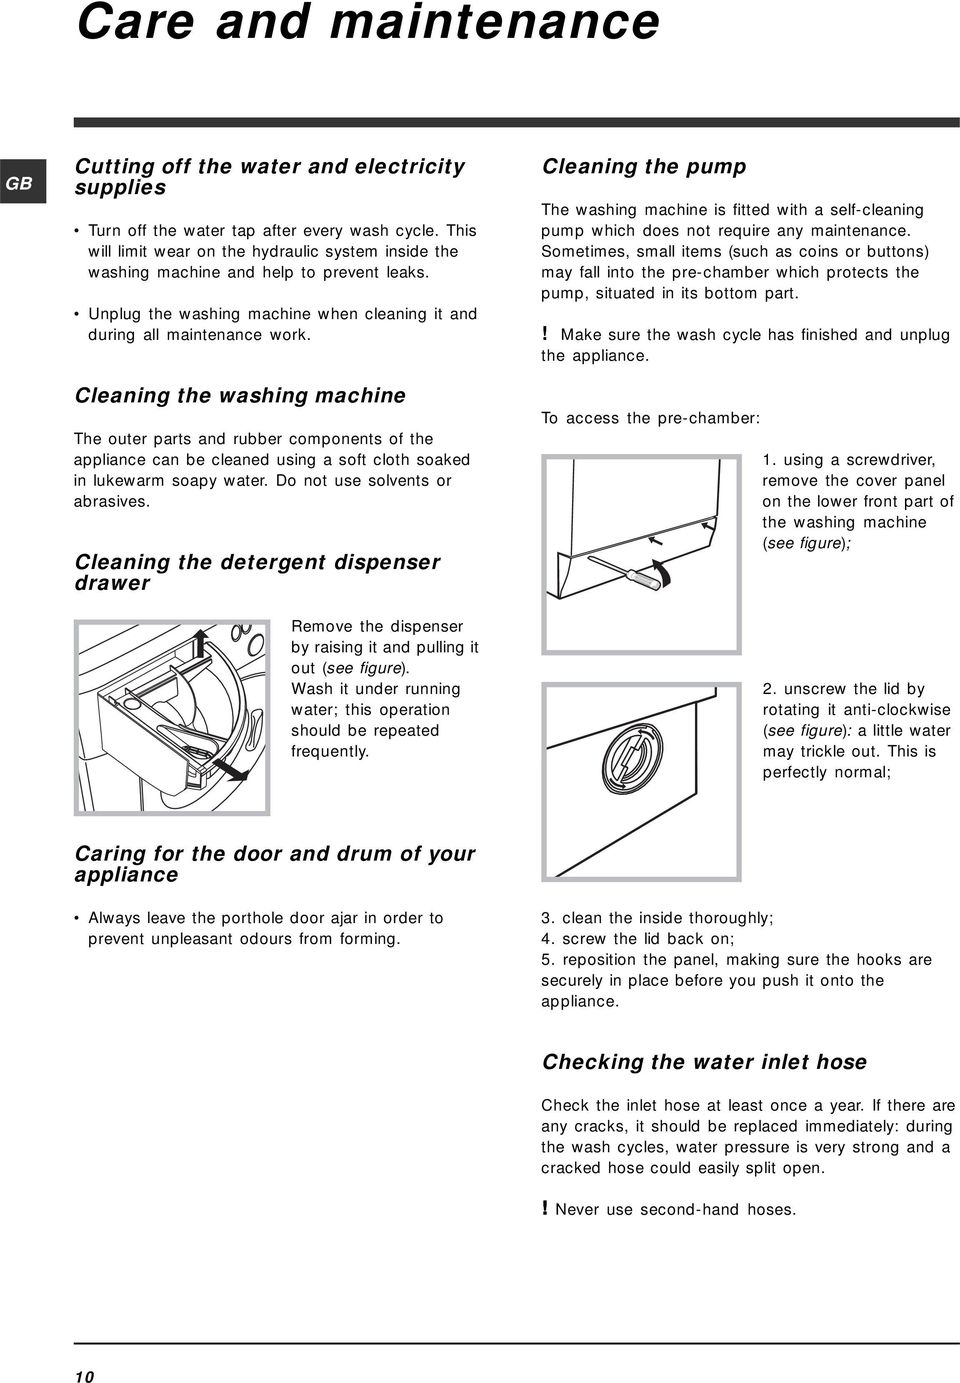 Cleaning the washing machine The outer parts and rubber components of the appliance can be cleaned using a soft cloth soaked in lukewarm soapy water. Do not use solvents or abrasives.